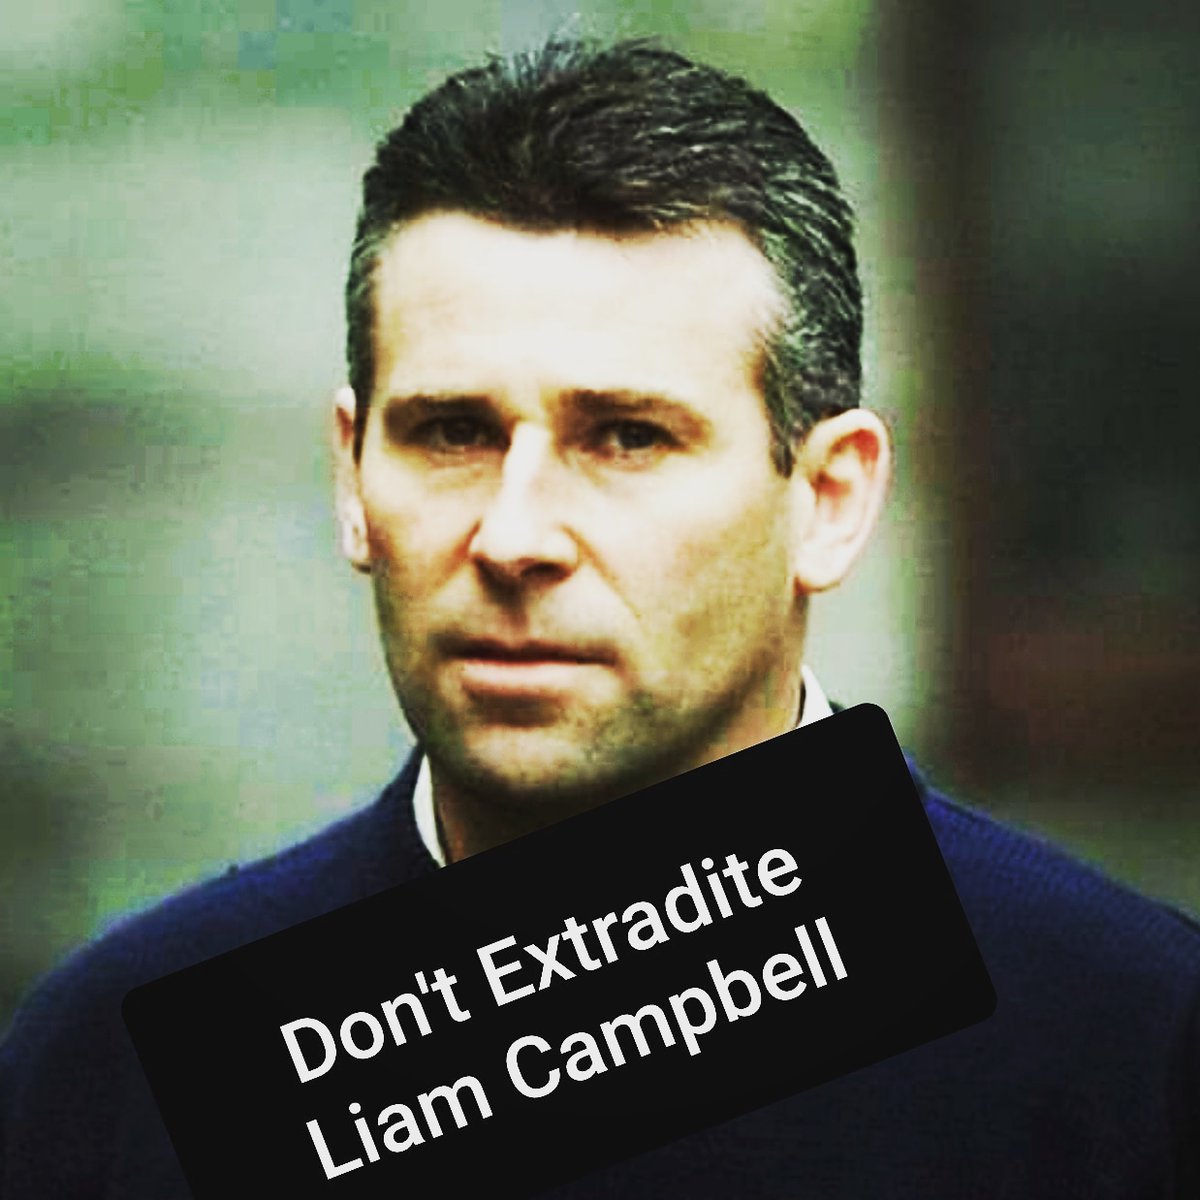 #StopTheExtradition
Support Liam Campbell
facebook.com/events/5911470…